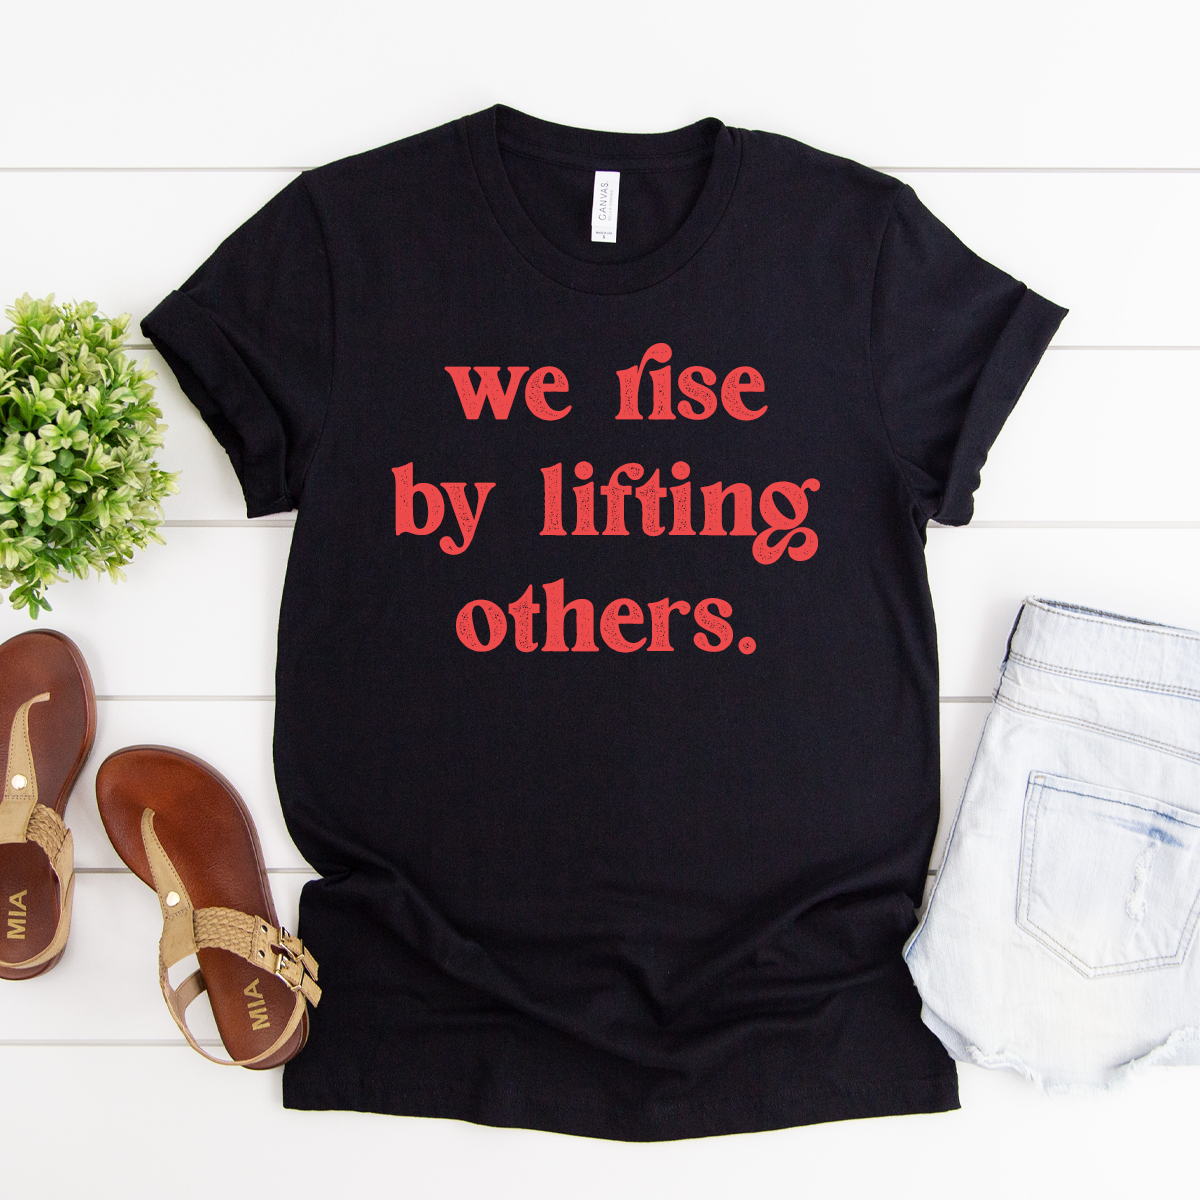 We Rise By Lifting Others Tee (Black Tee) - Southern Grace Creations